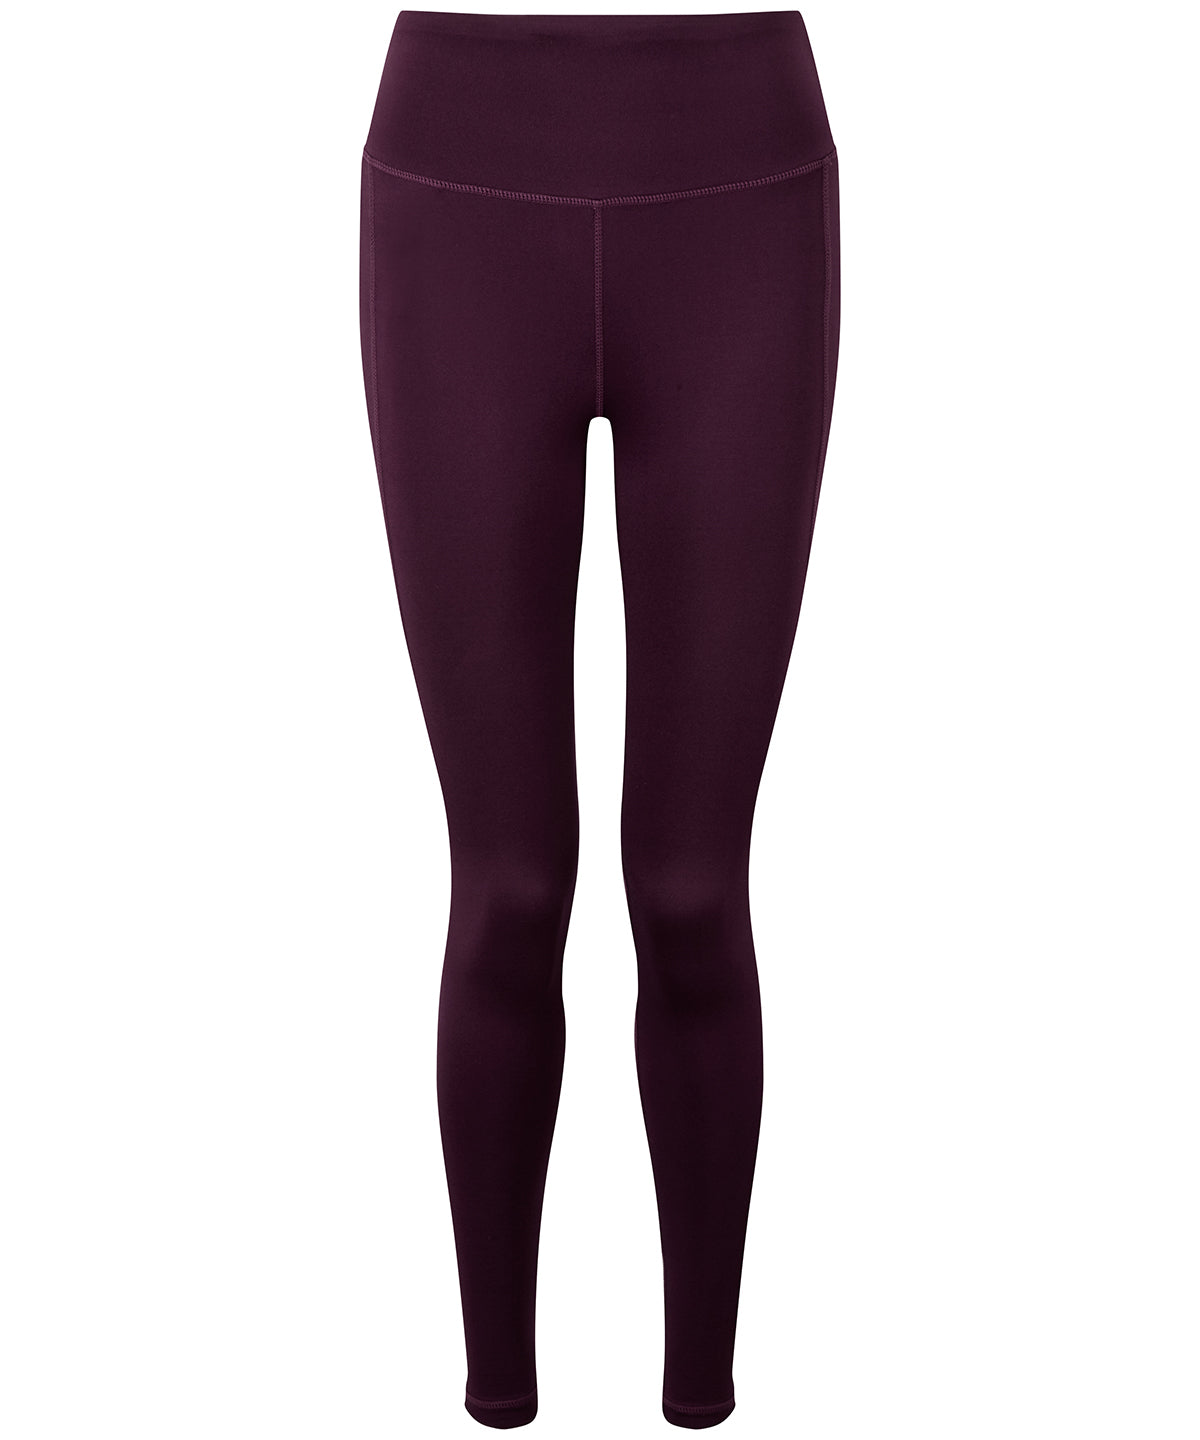 Mulberry - Women's TriDri® performance leggings Leggings TriDri® Activewear & Performance, Athleisurewear, Back to the Gym, Exclusives, Leggings, Lounge Sets, Must Haves, On-Trend Activewear, Outdoor Sports, Rebrandable, Sports & Leisure, Team Sportswear, Trousers & Shorts, UPF Protection Schoolwear Centres